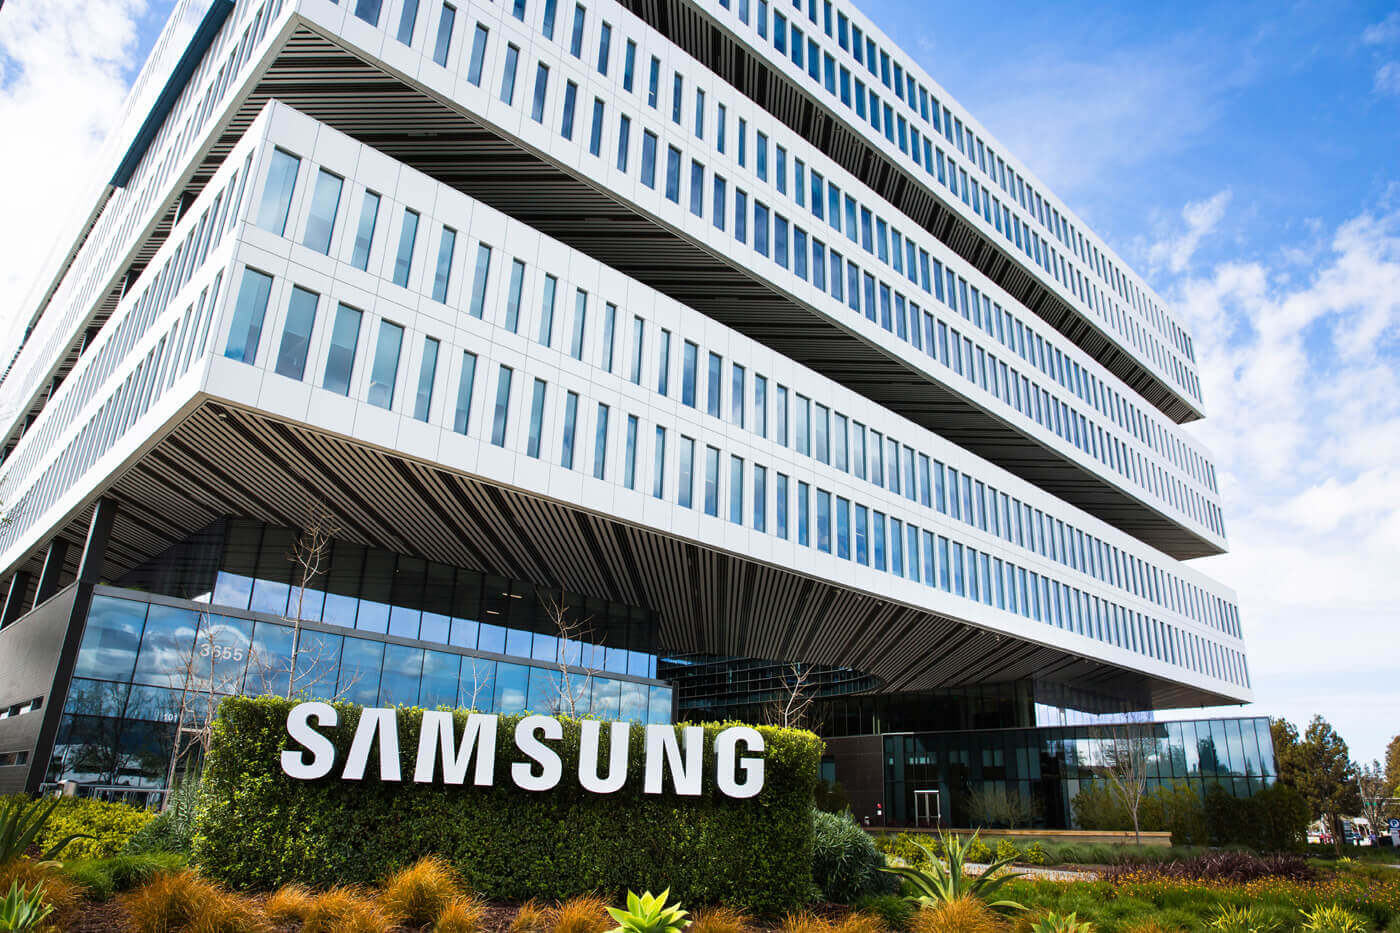 Samsung announces better-than-expected Q1 2020 earnings guidance